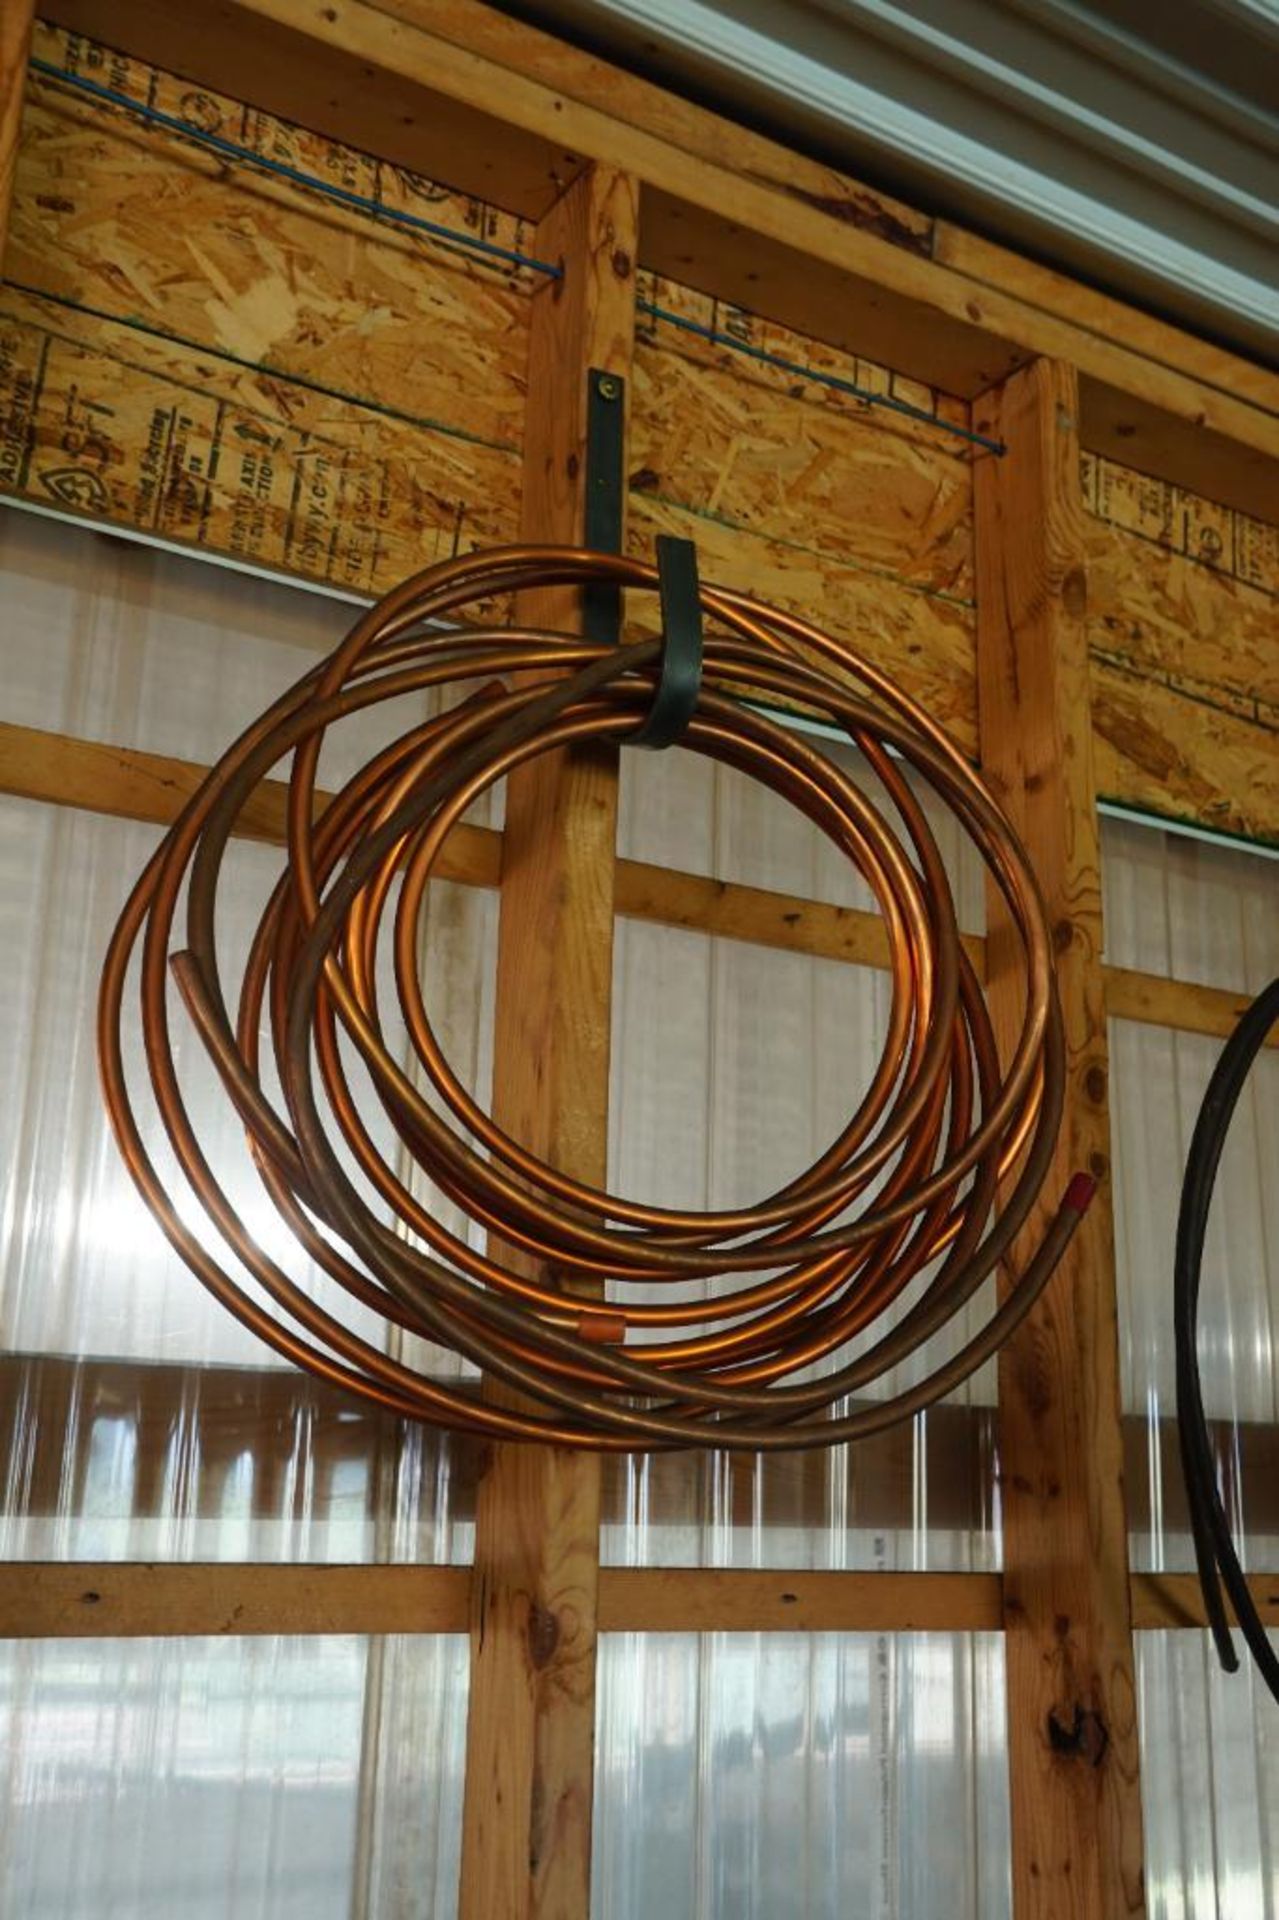 Copper Tubing and V Belts on Wall - Image 2 of 11